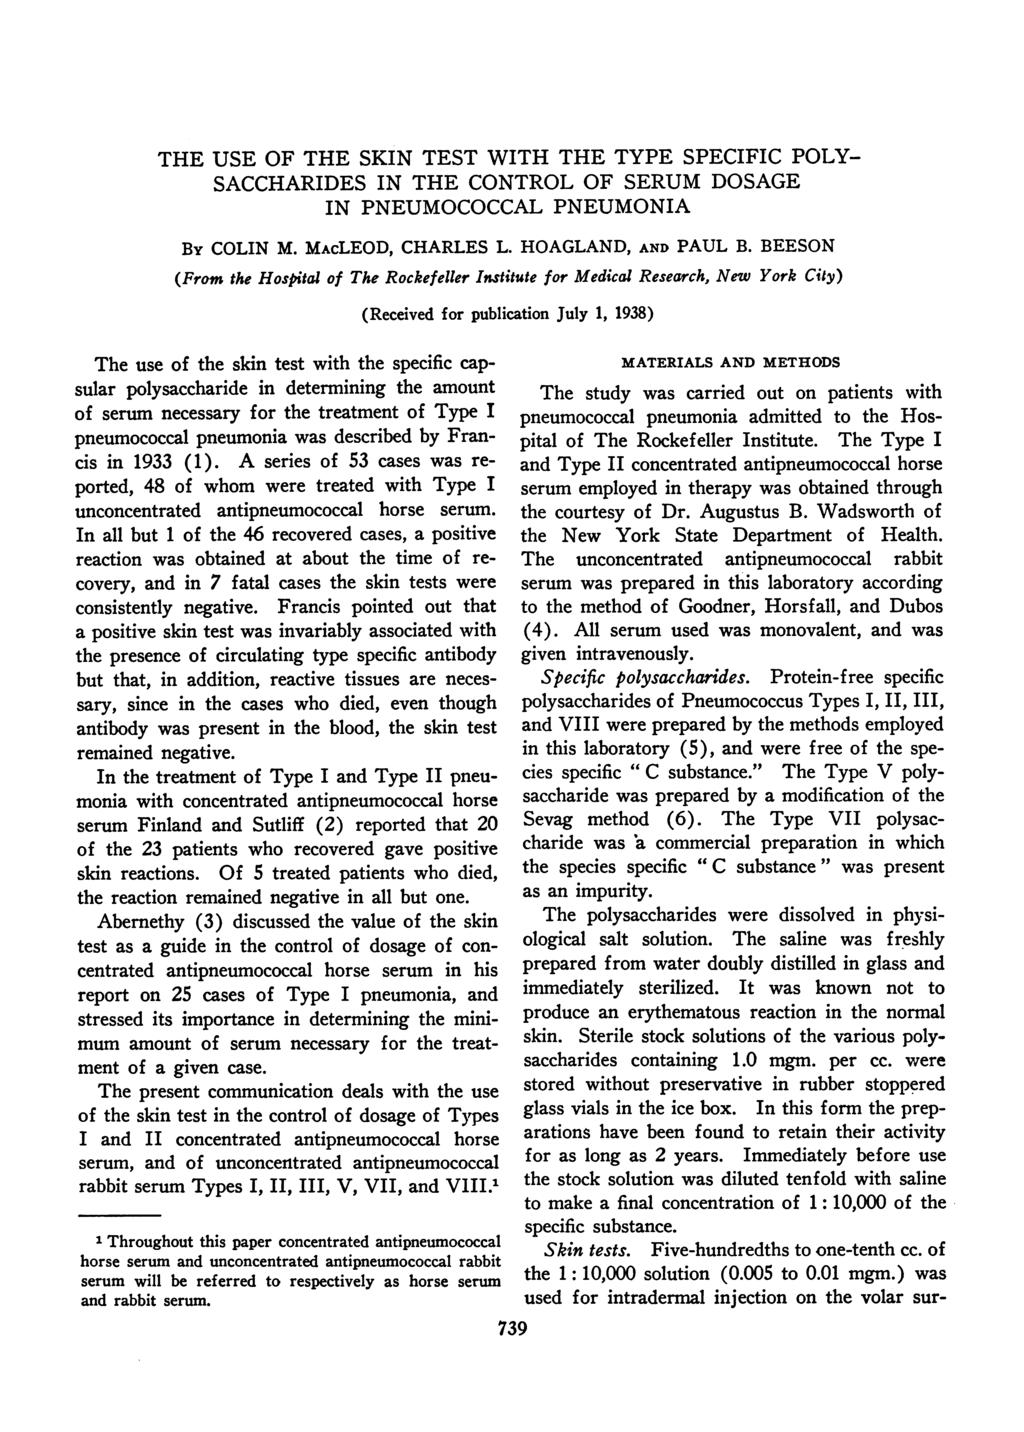 THE USE OF THE SKIN TEST WITH THE TYPE SPECIFIC POLY- SACCHARIDES IN THE CONTROL OF SERUM DOSAGE IN PNEUMOCOCCAL PNEUMONIA By COLIN M. MAcLEOD, CHARLES L. HOAGLAND, AND PAUL B.